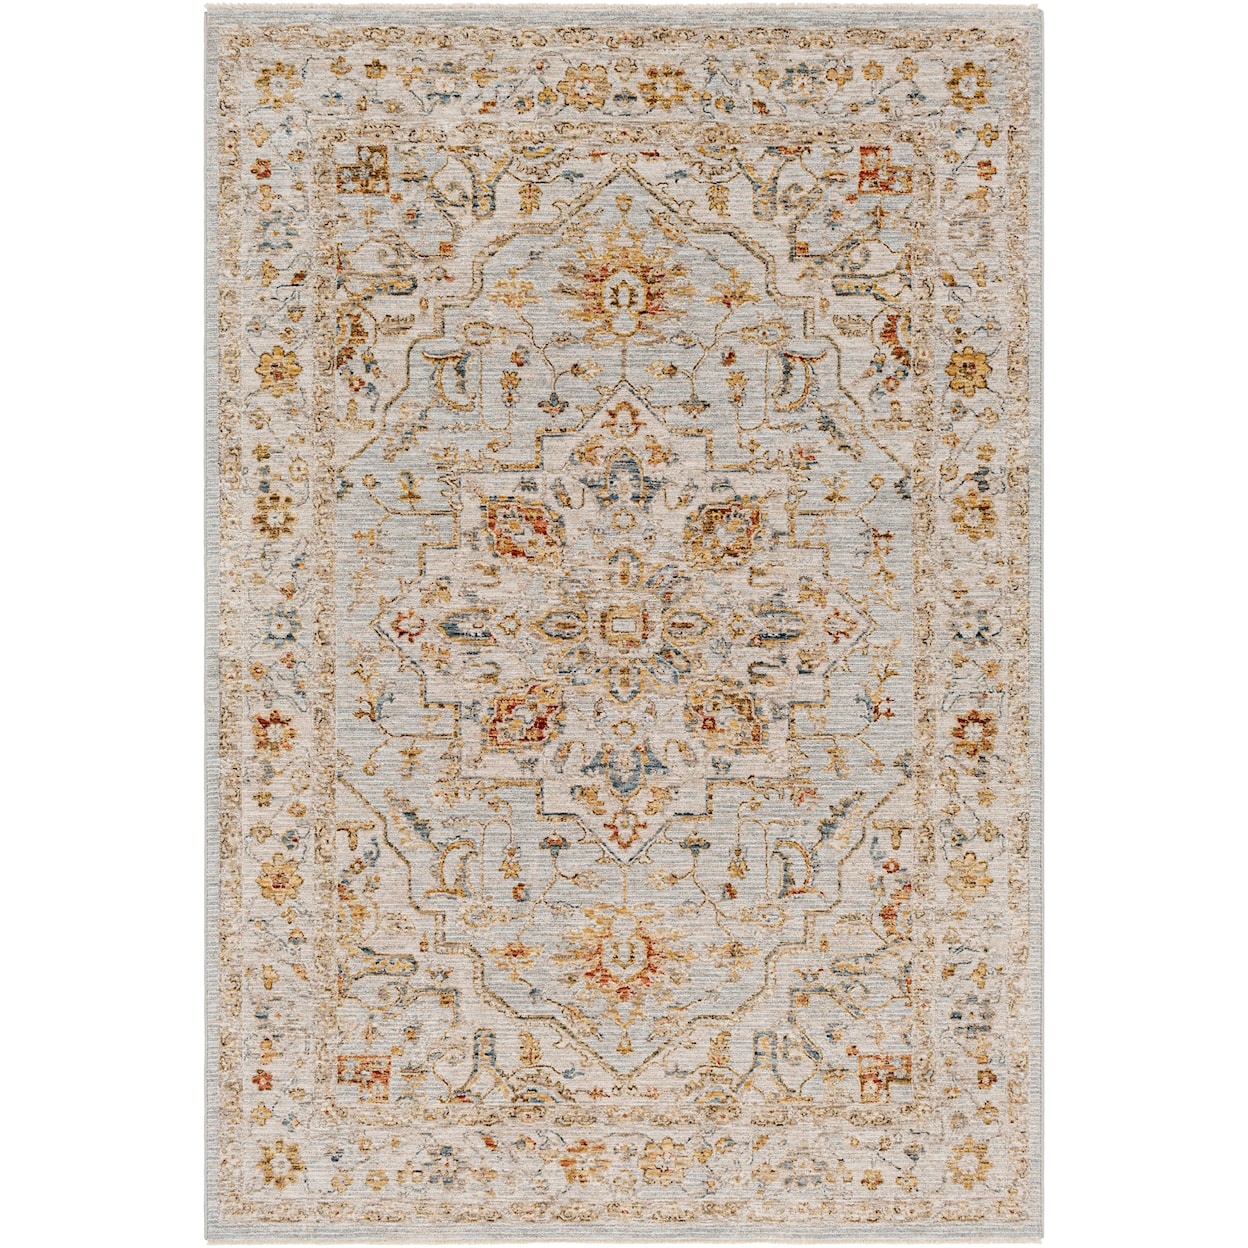 Ruby-Gordon Accents Reina Rugs